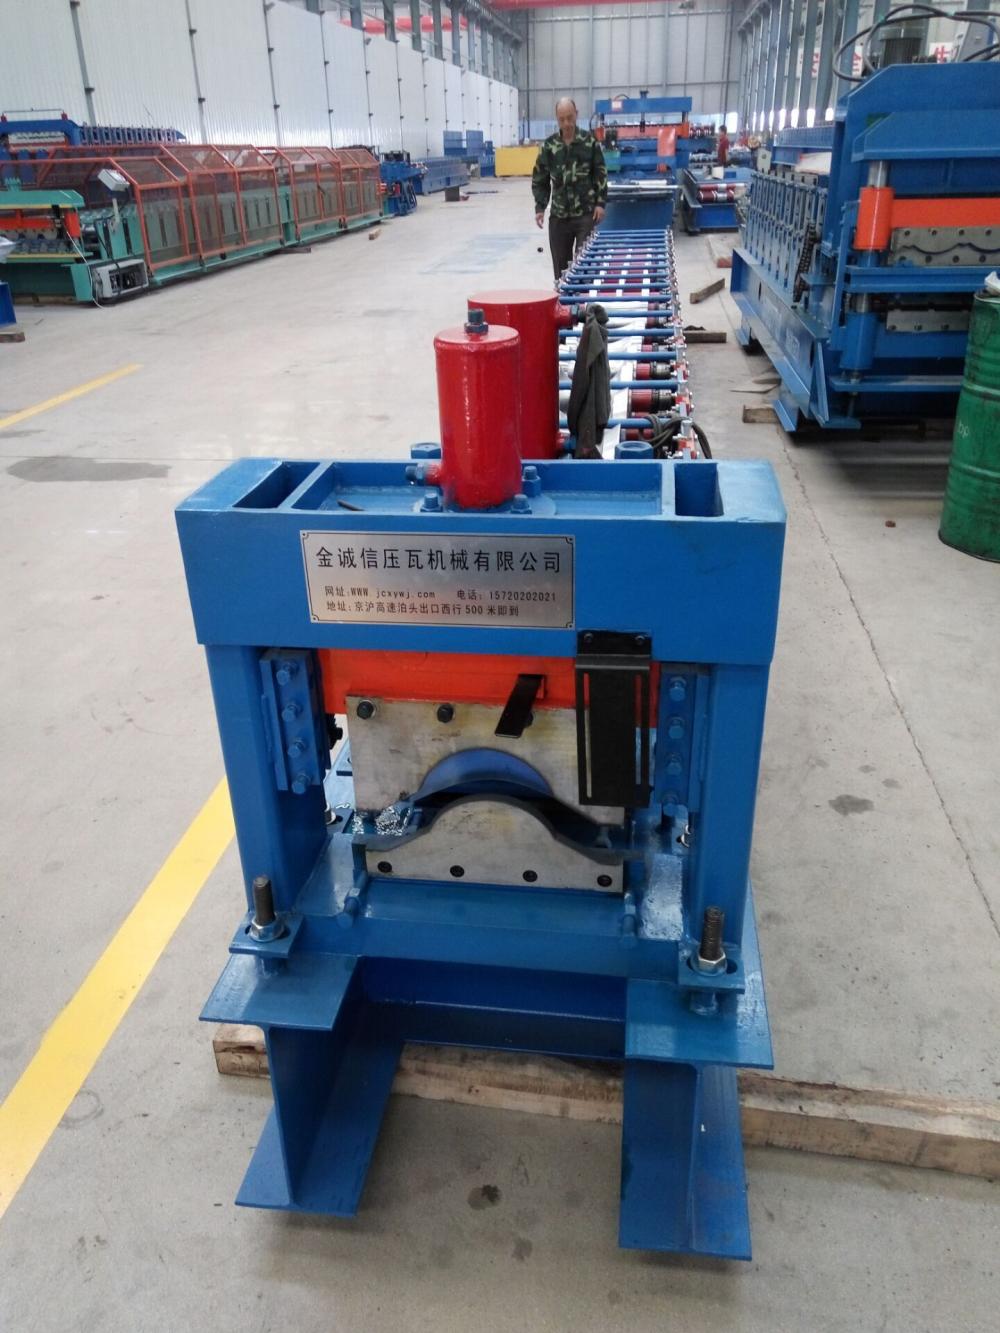 Rapid Delivery for Metal Curving Unistrut Roll Forming Machine - Colored Metal ridge cap making machine – Yingyee